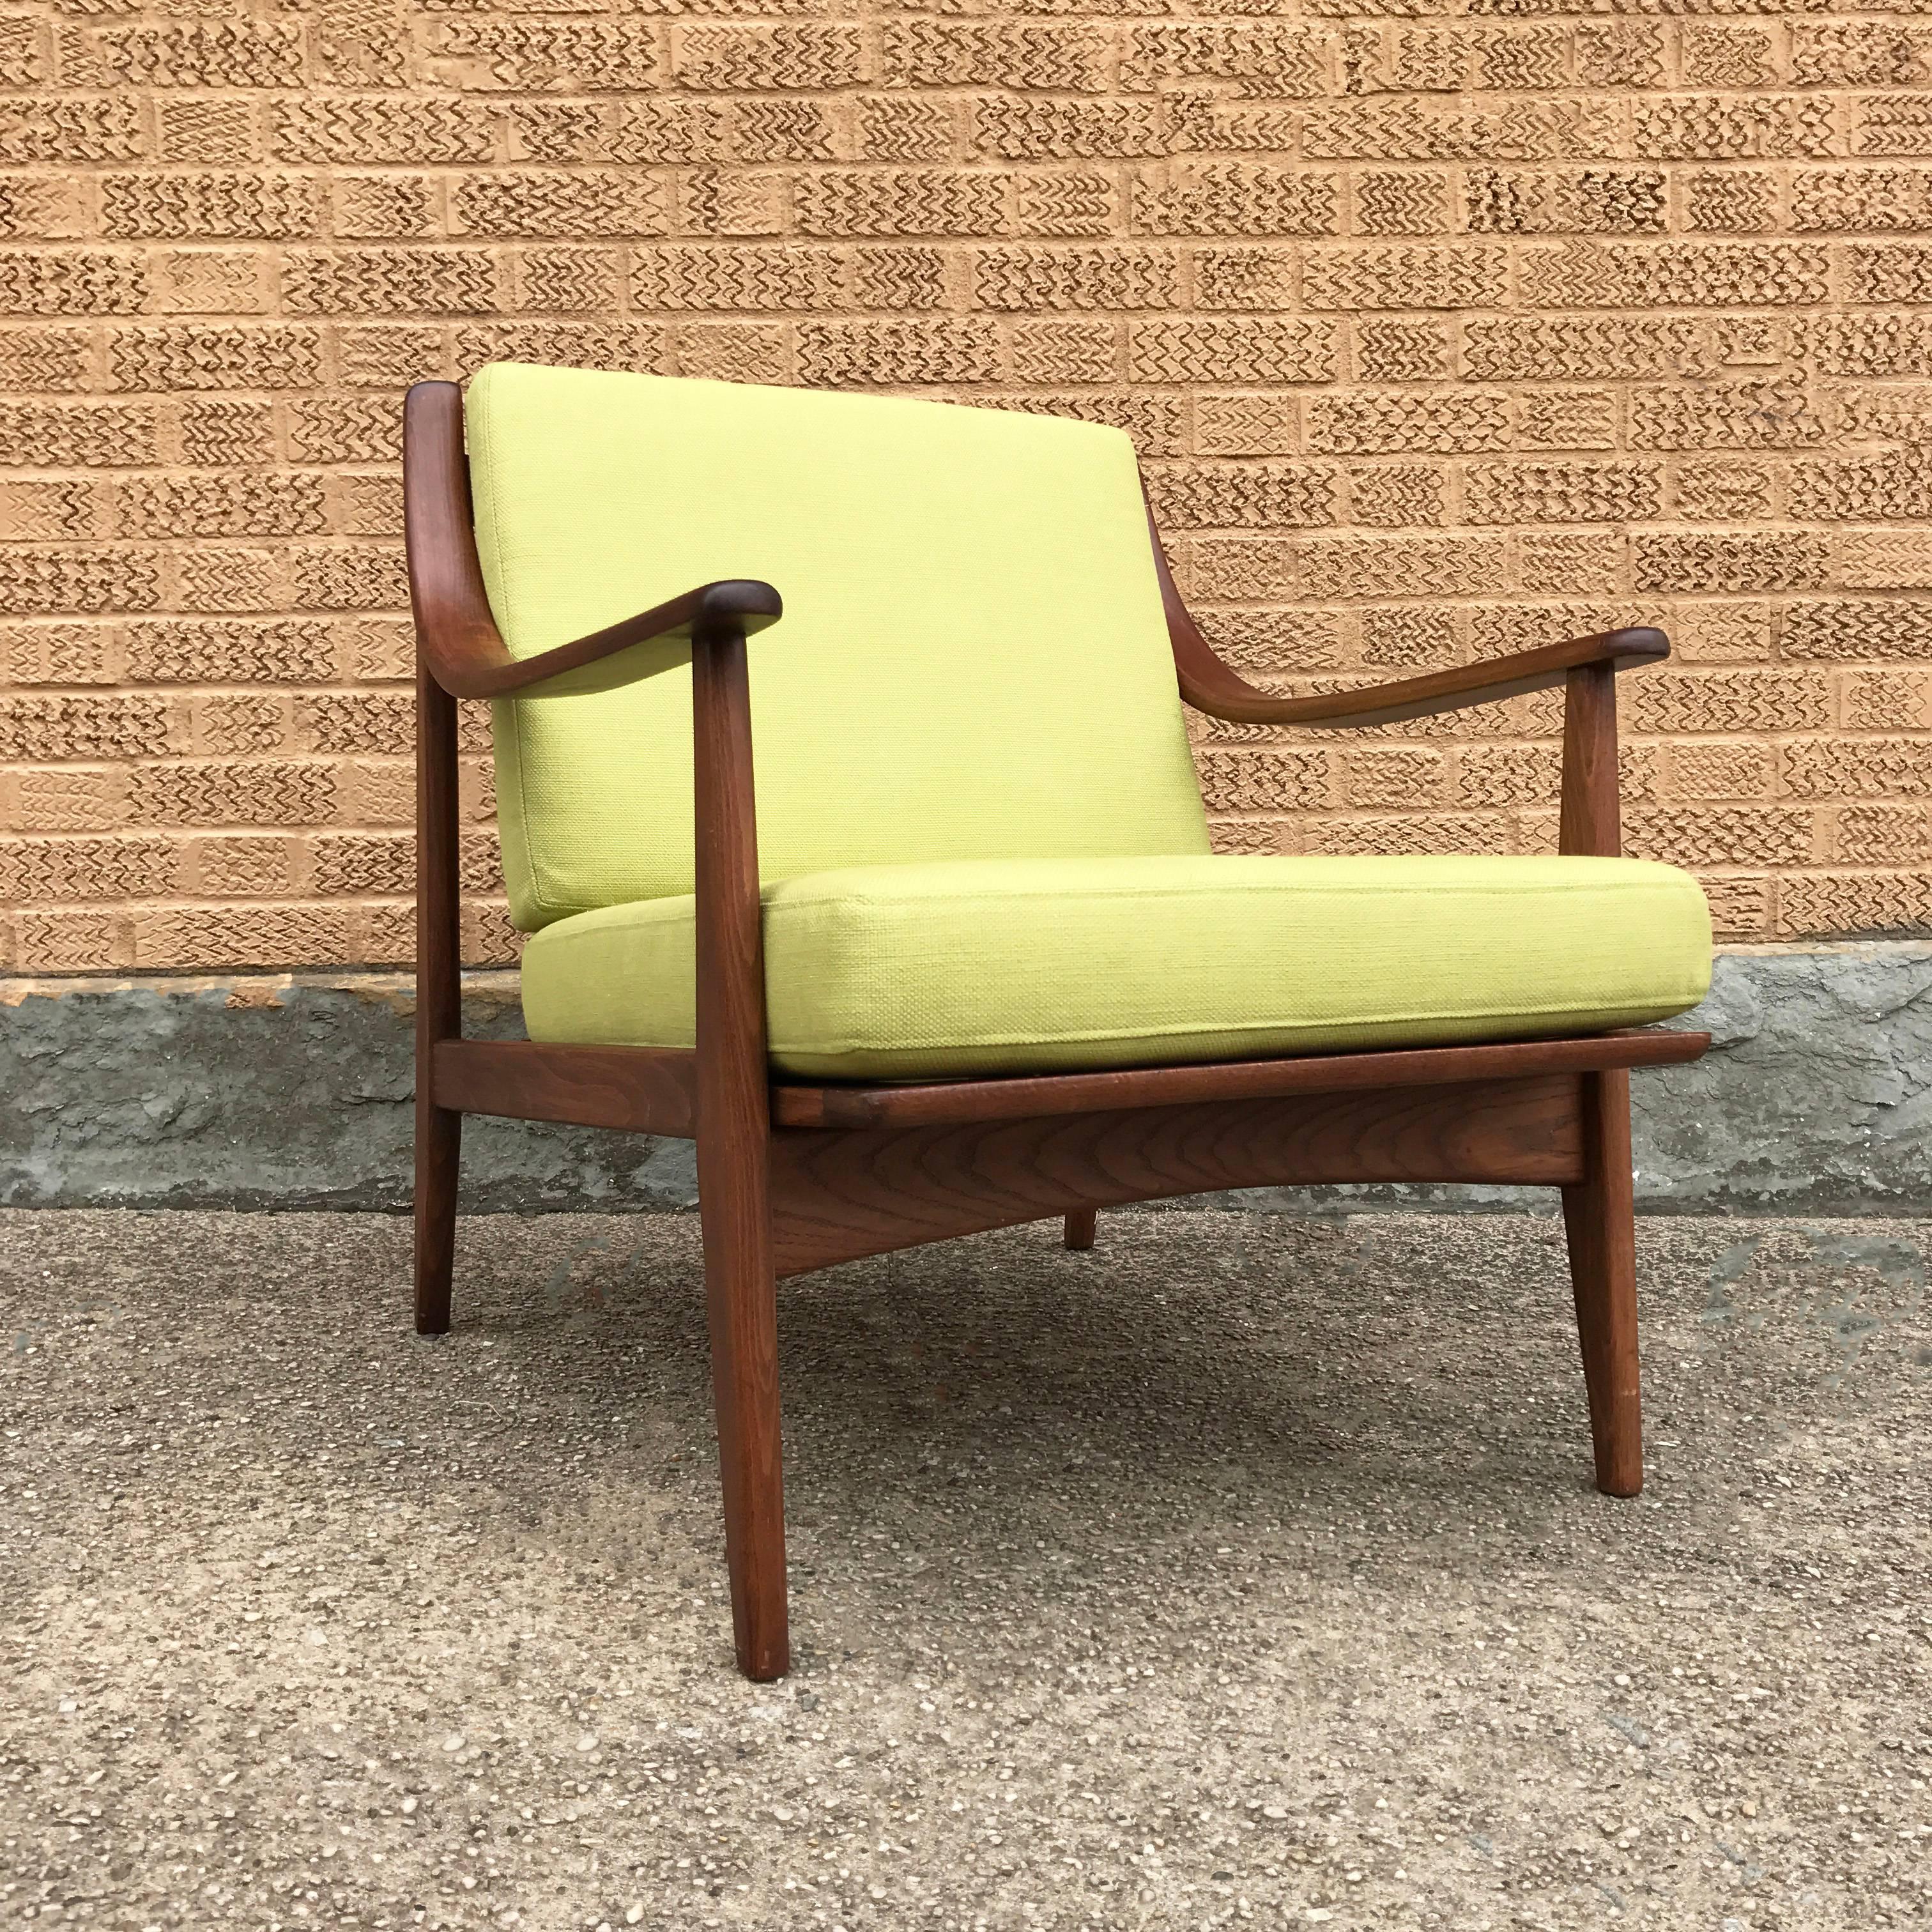 Low profile, Danish modern, teak lounge chair by Peter Hvidt & Orla Mølgaard Nielsen featuring scoop arms is newly finished and upholstered in a chartreuse cotton blend.